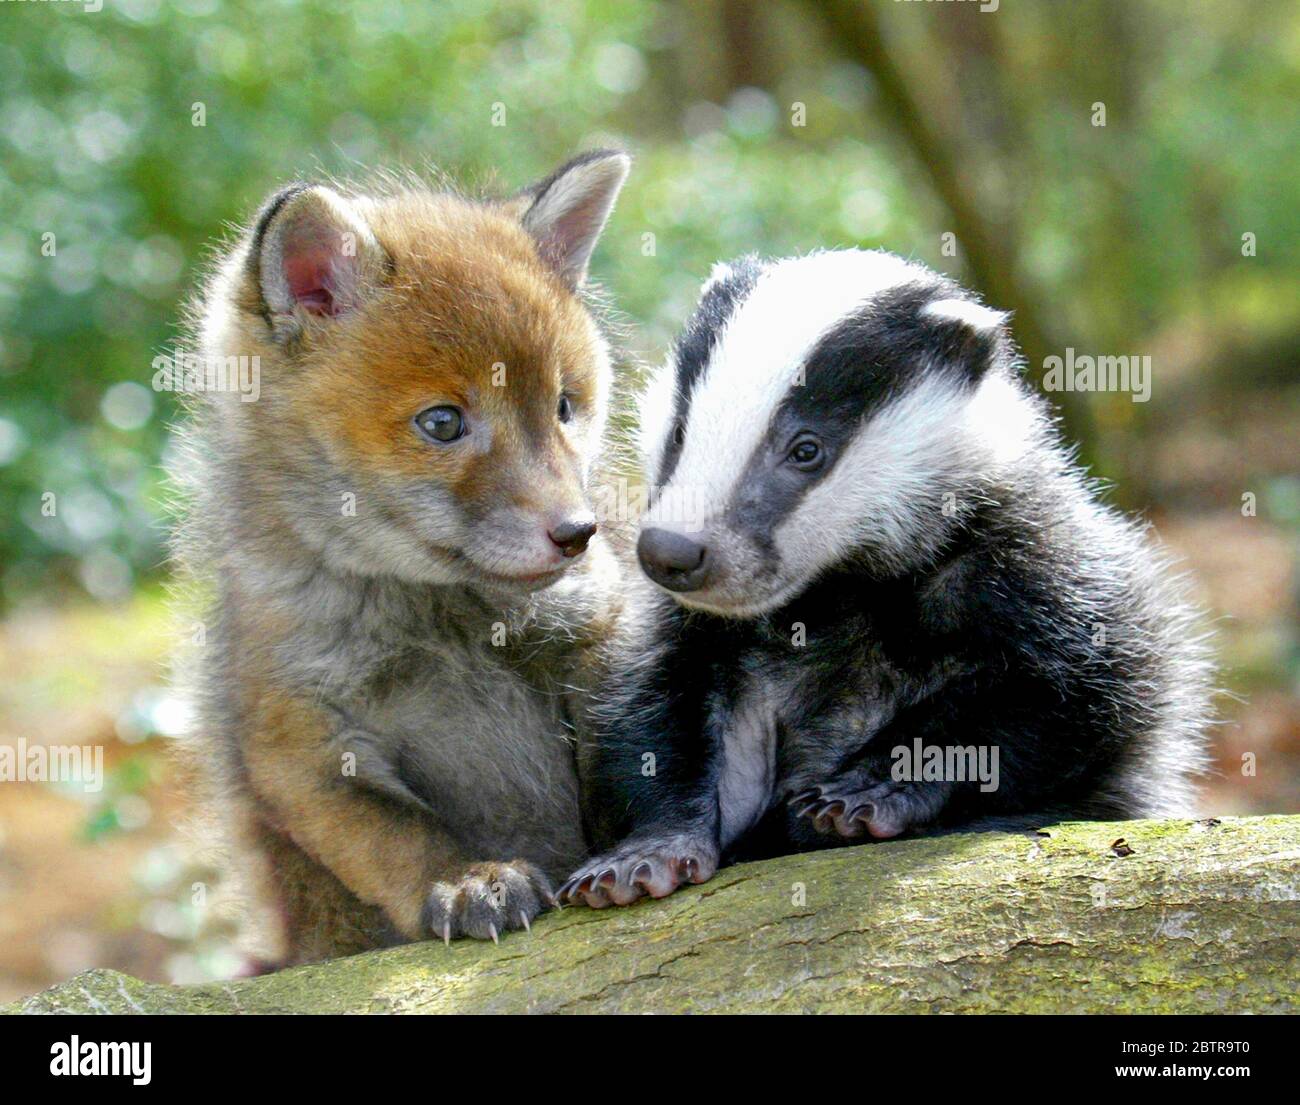 Badger cub and a fox cub in Surrey, England. The cute baby wild animals became great friends whist recovering from illness. Stock Photo